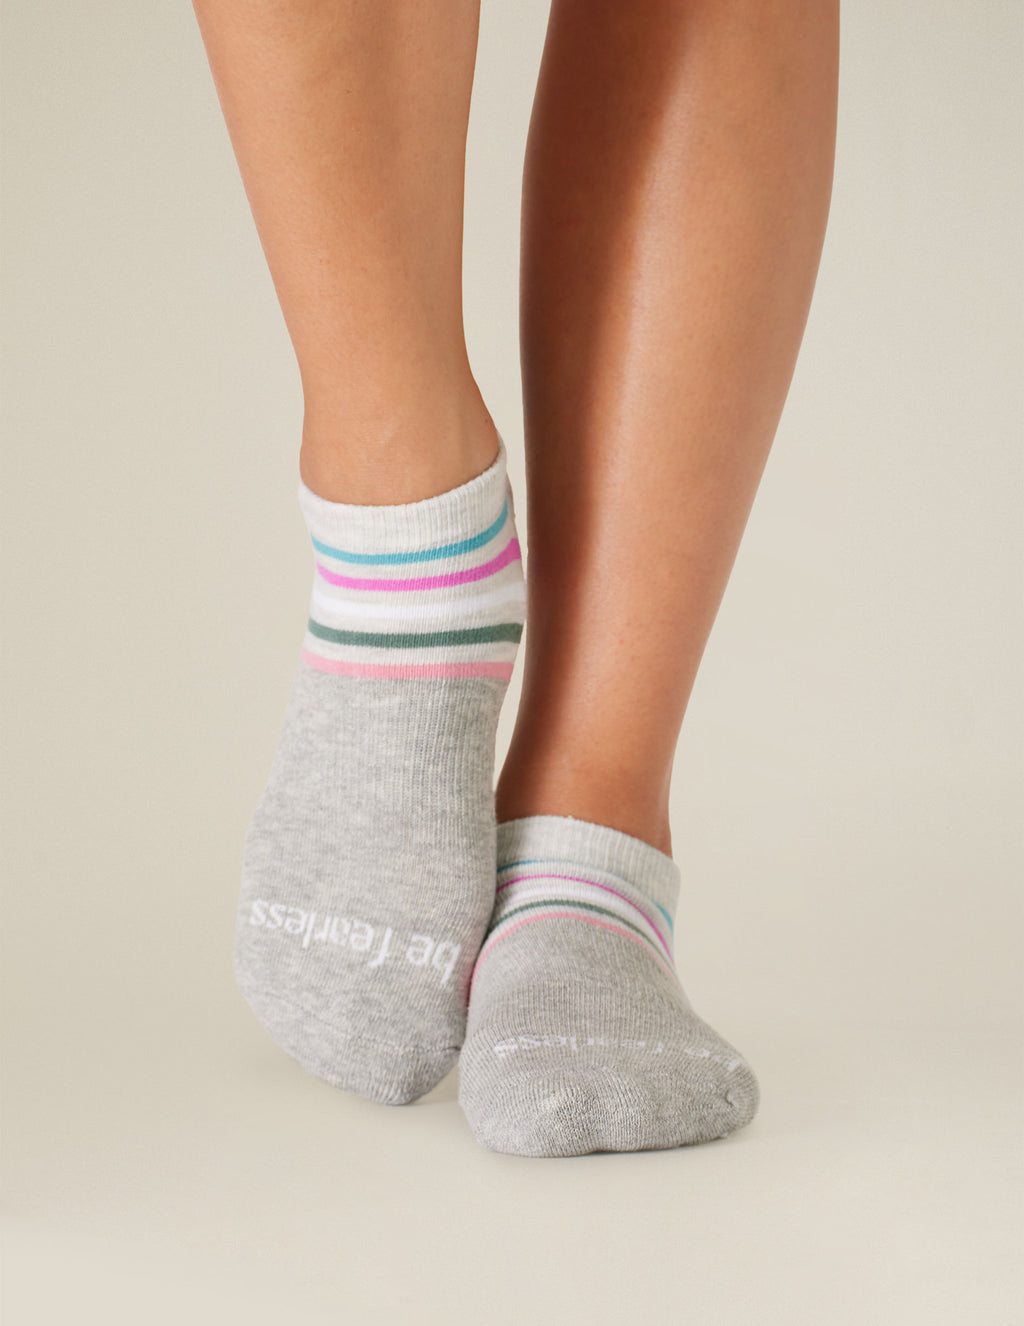 Sticky Be Fearless Grip Socks Featured Image